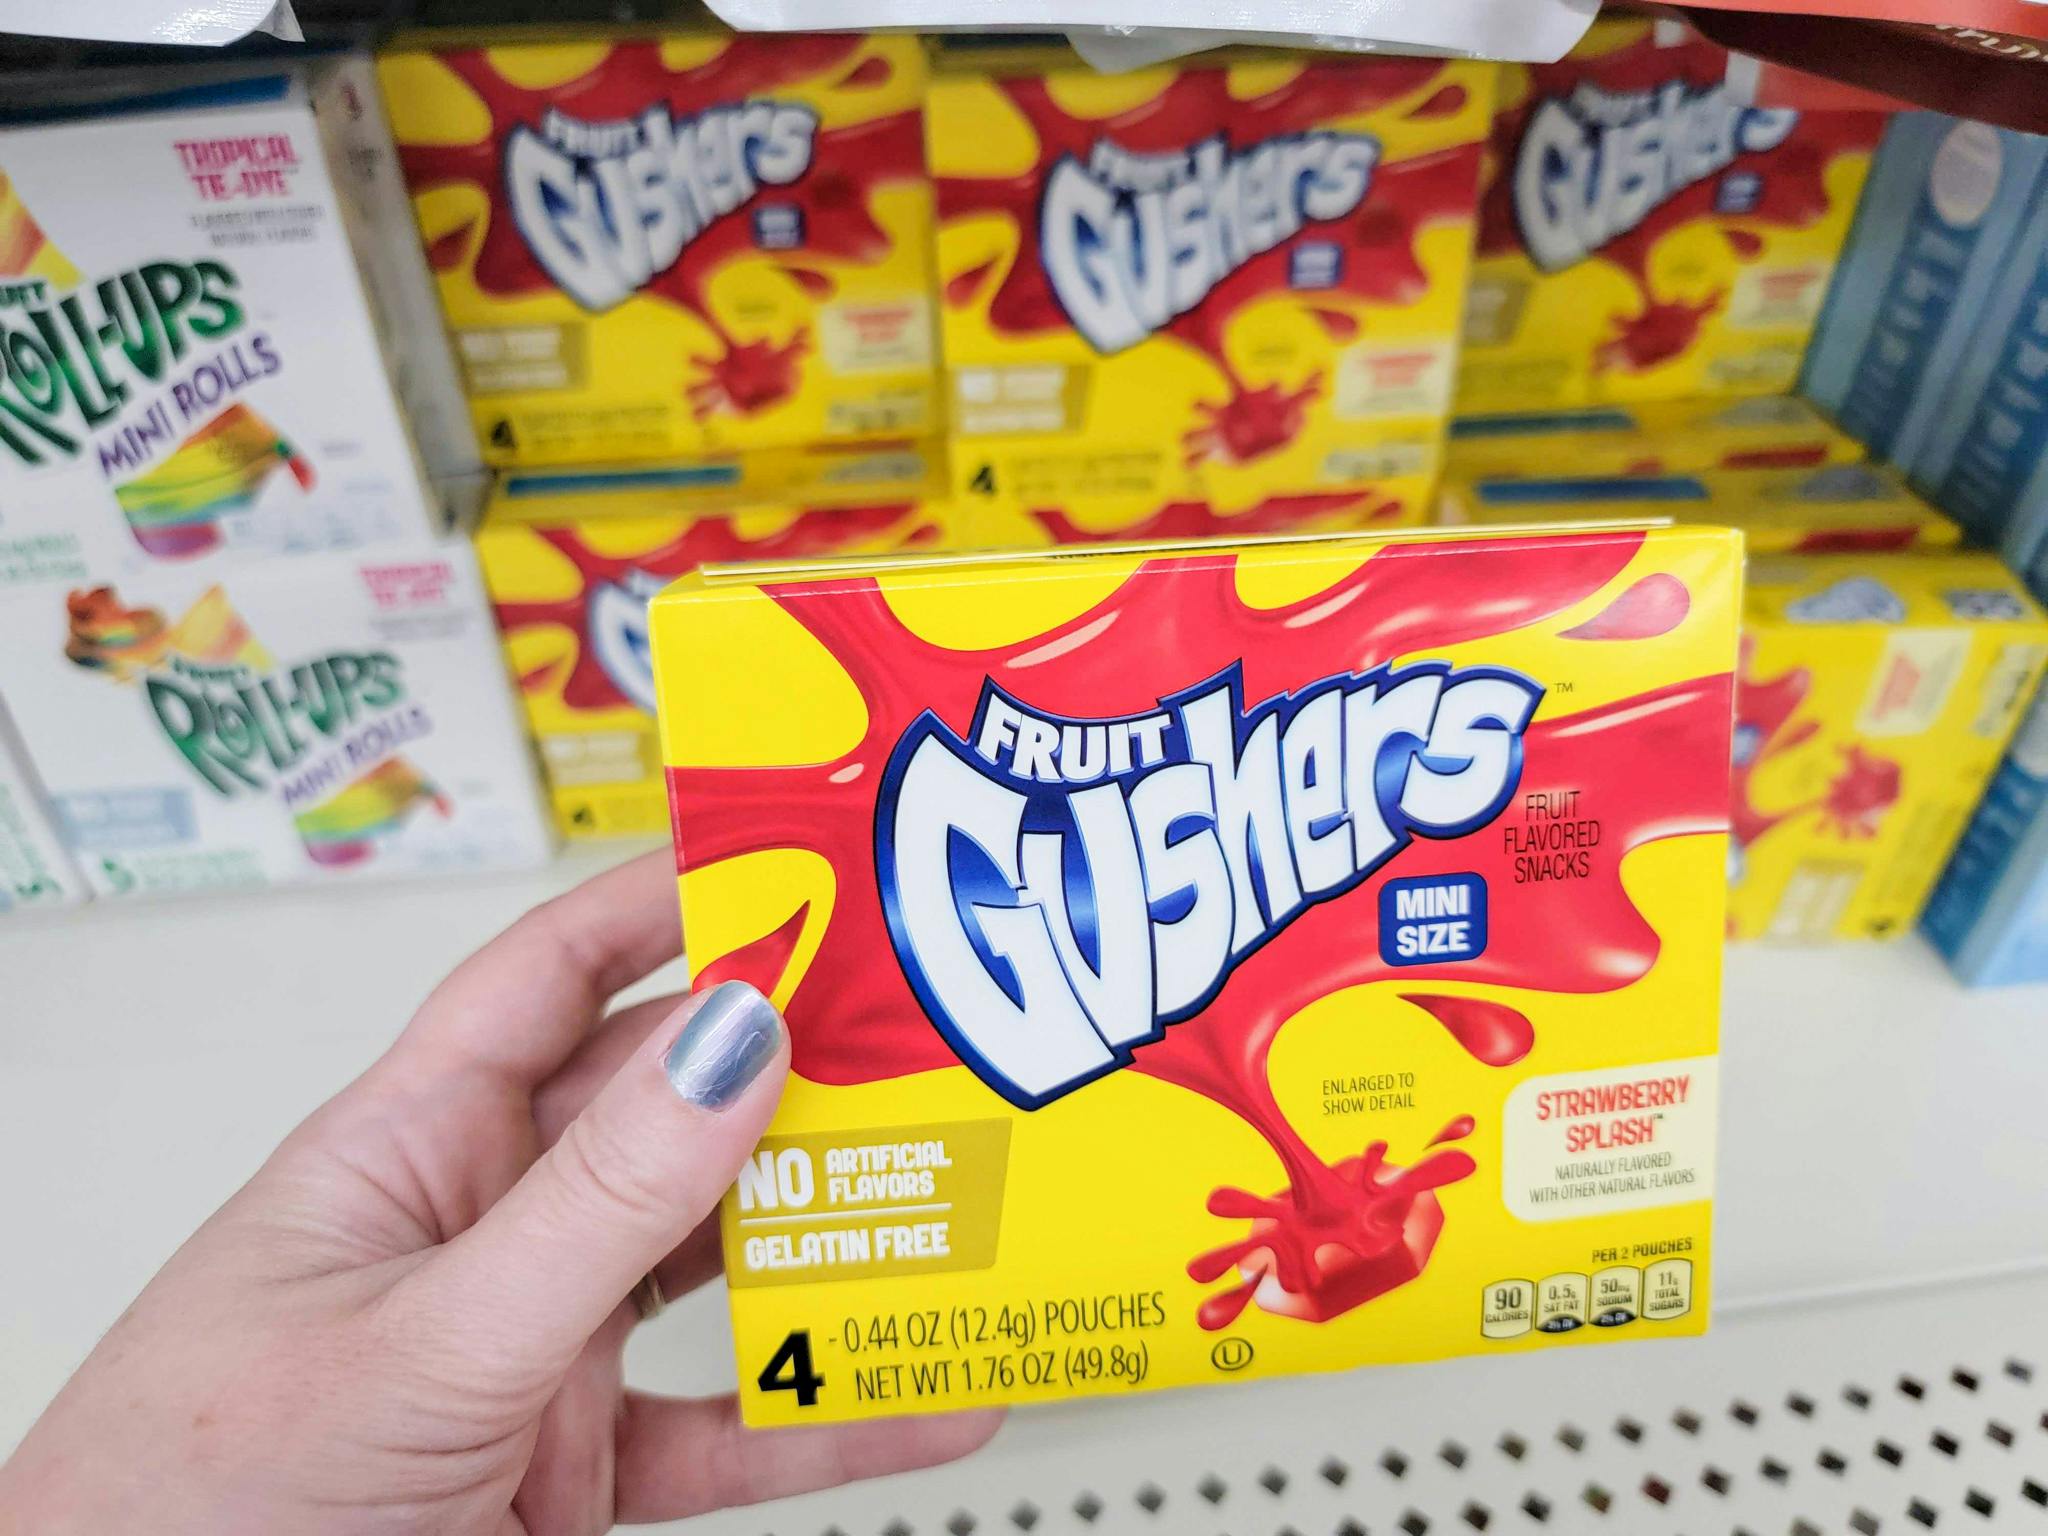 hand holding a box of gushers fruit snacks